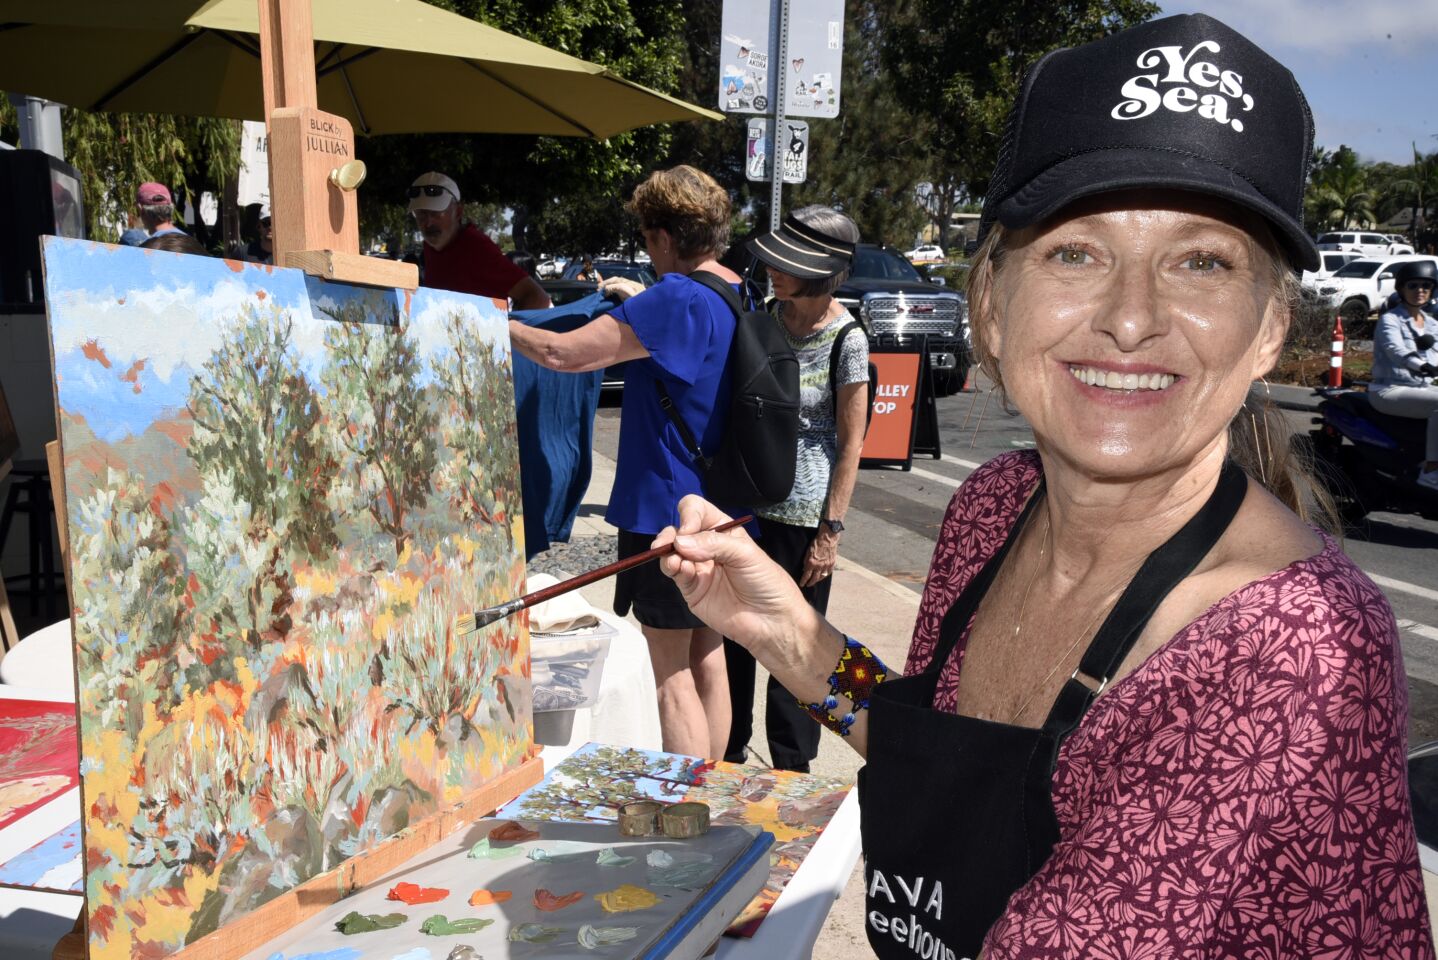 Artist Mary Ambrose did a live painting for walkers to enjoy